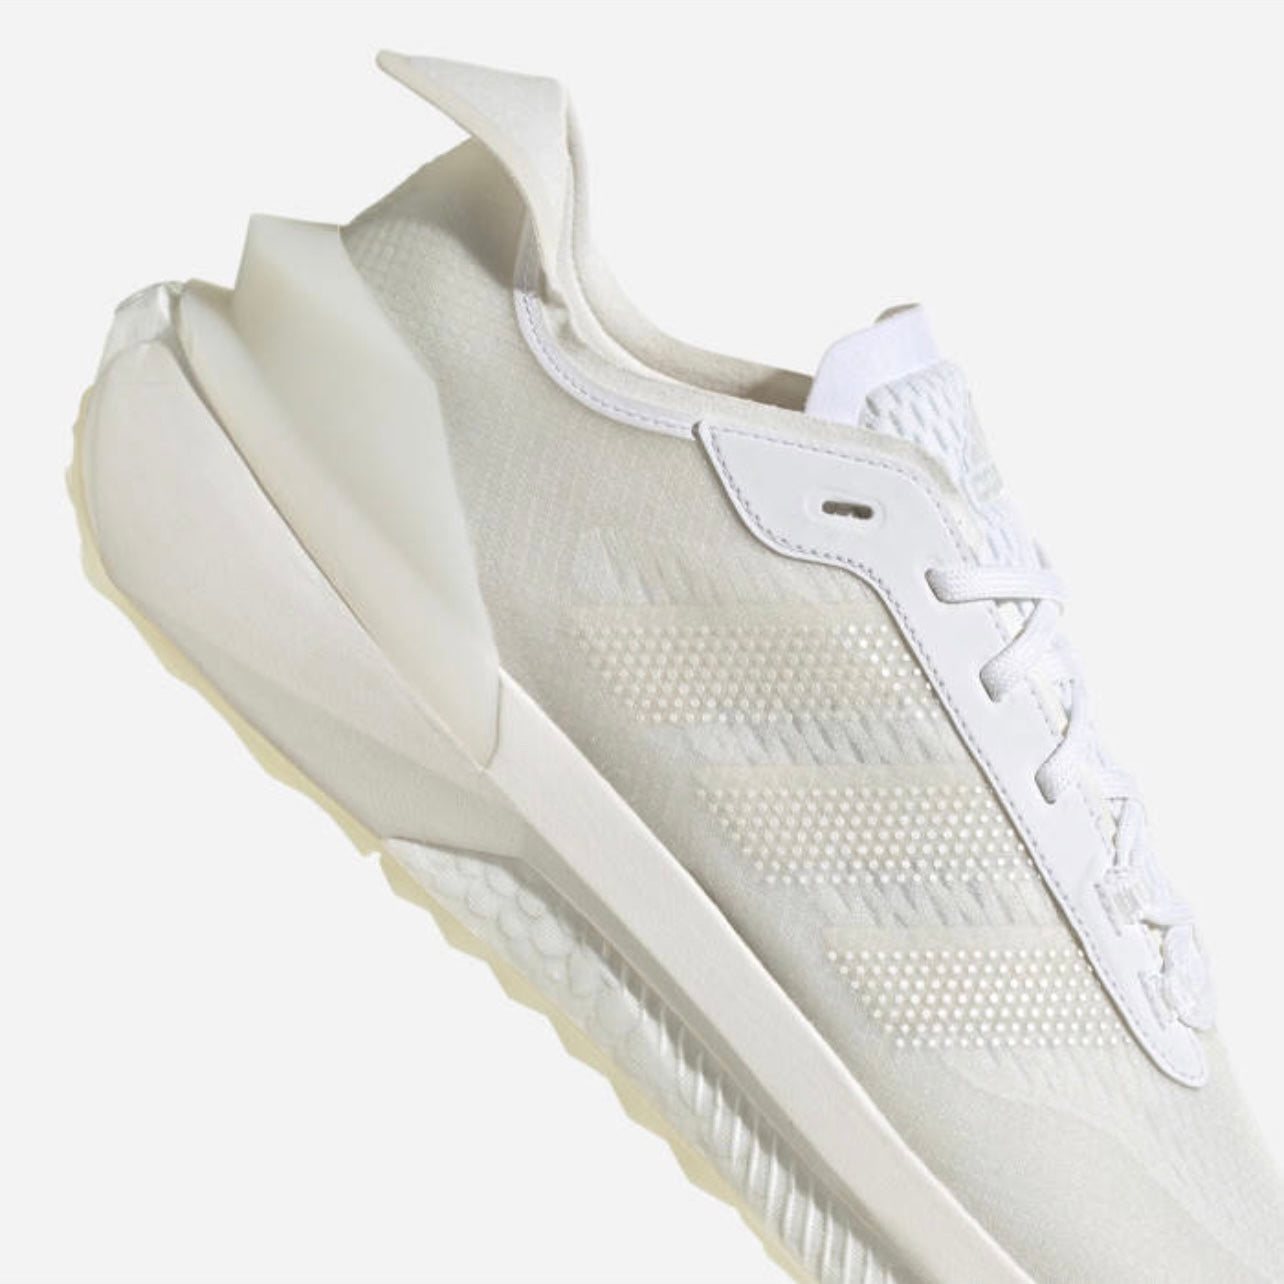 Adidas sneakers for men (HP5972)in white